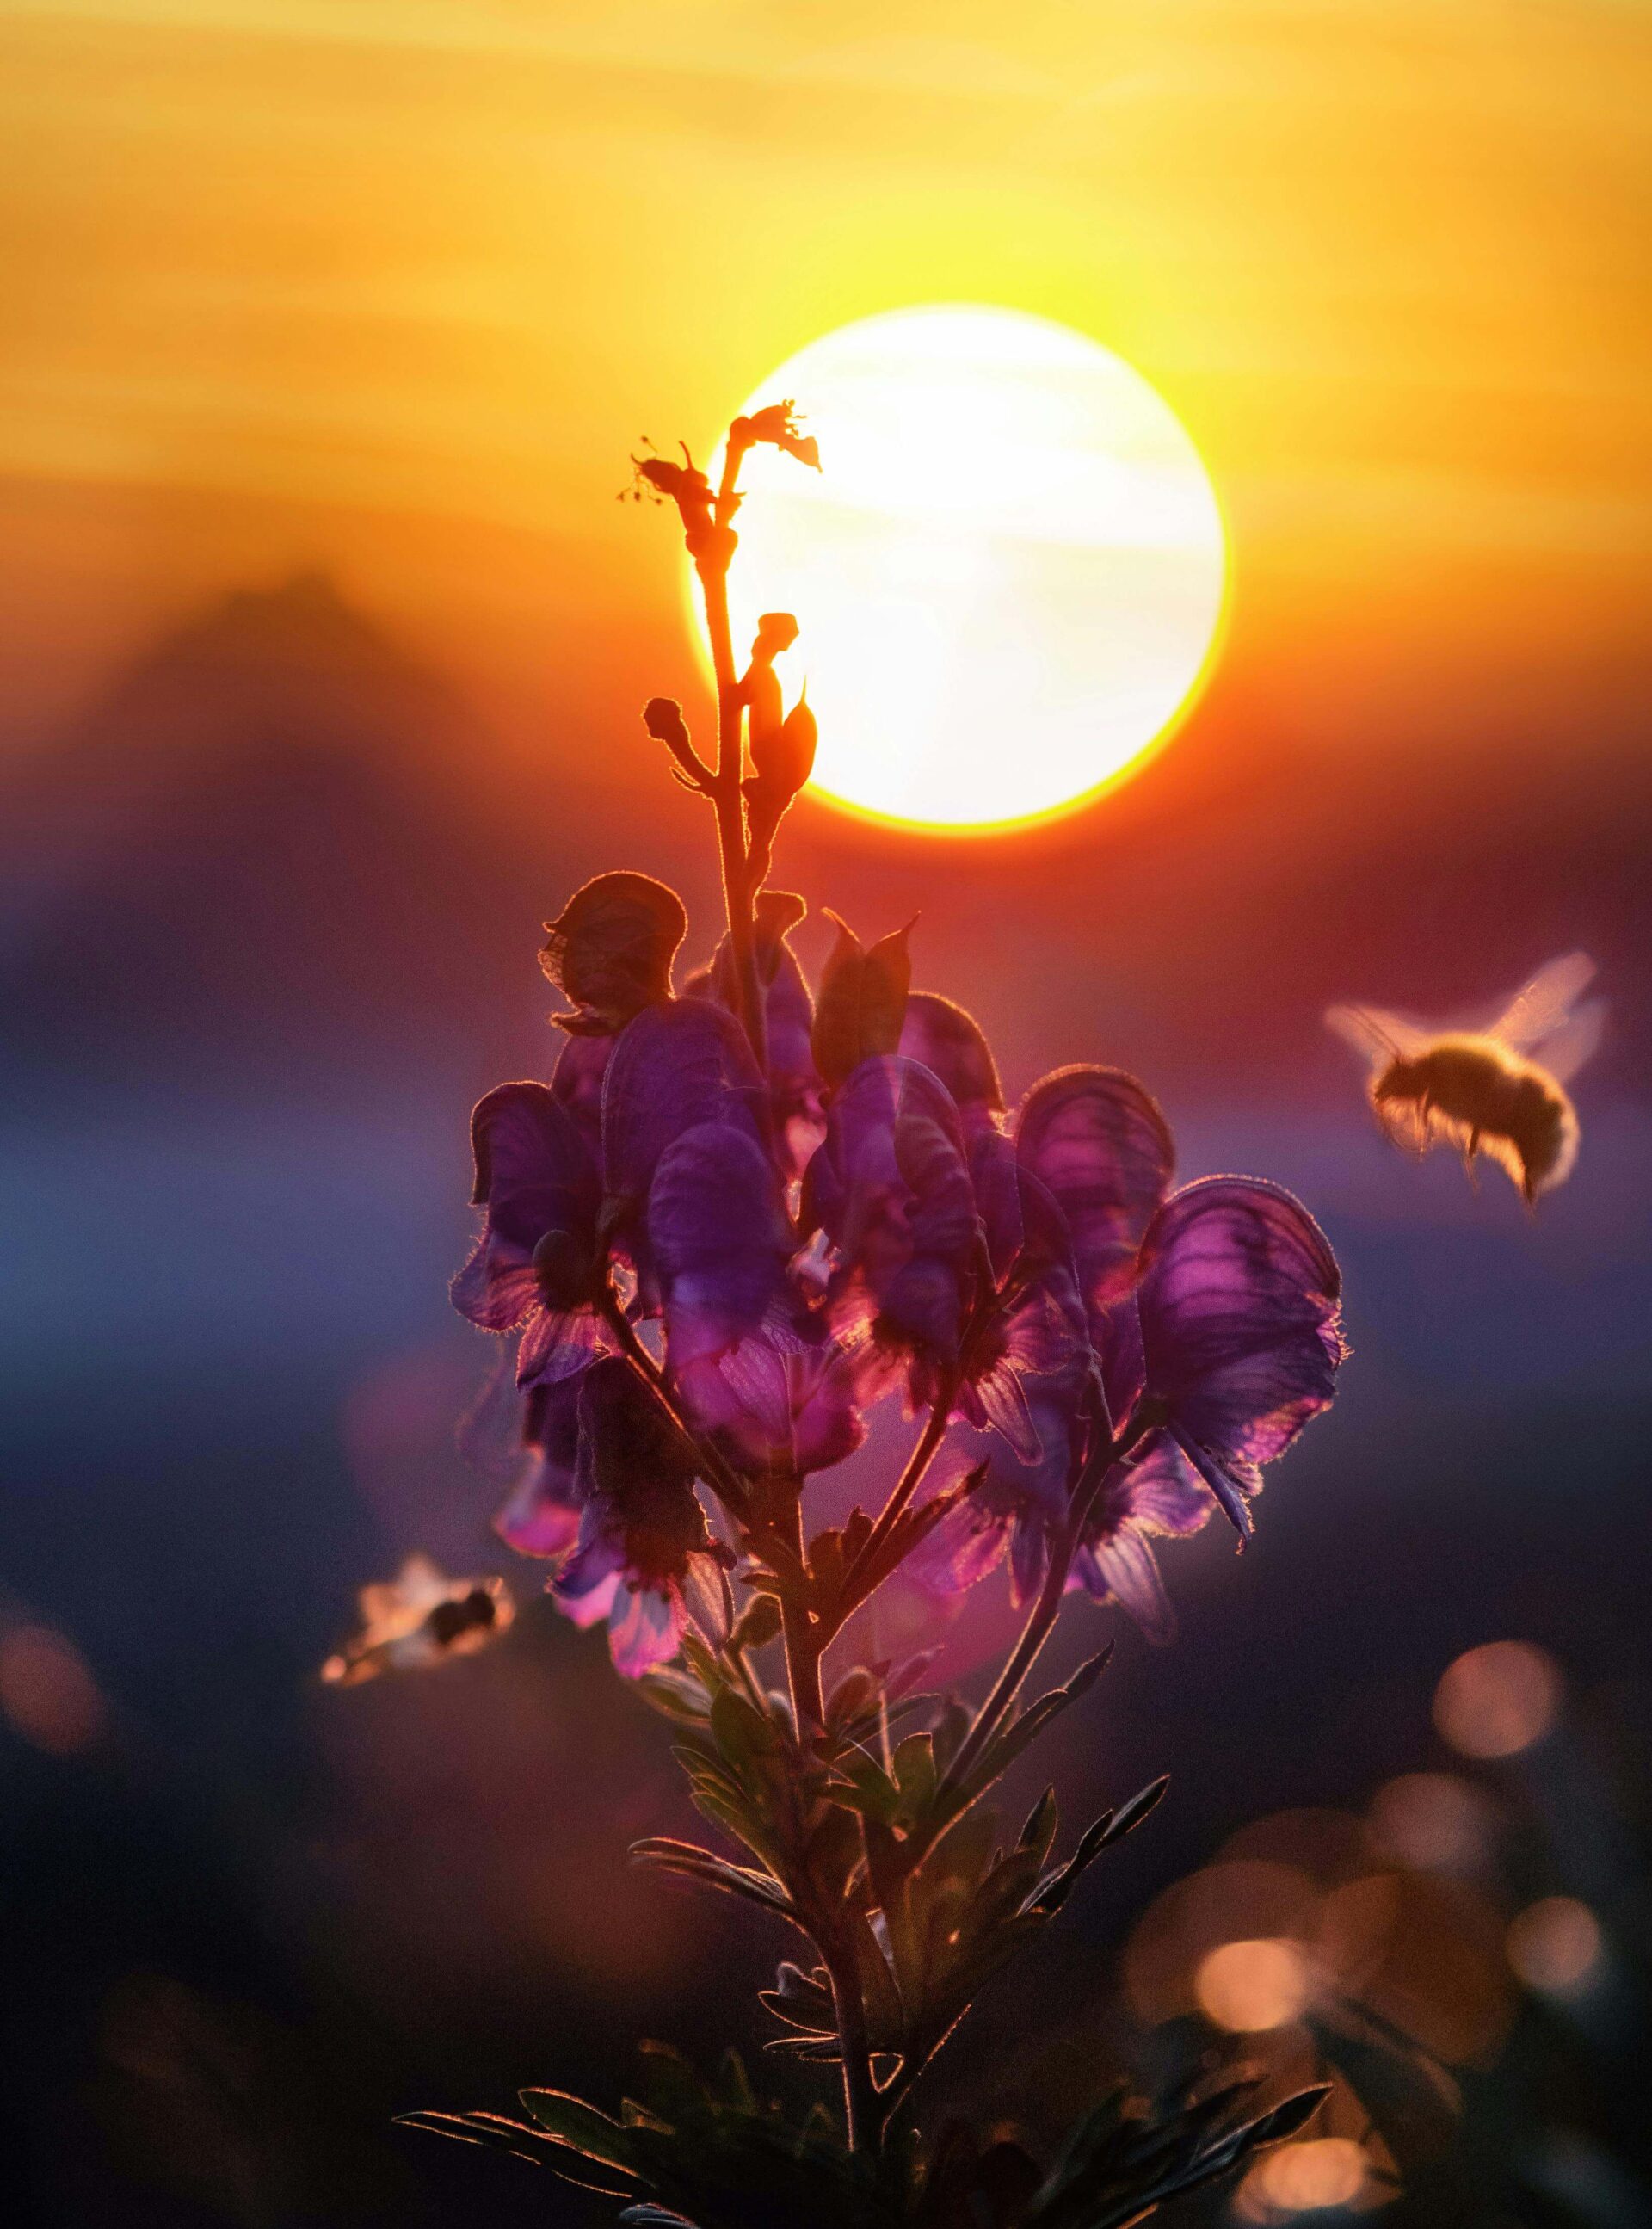 A flower with the setting sun in the background